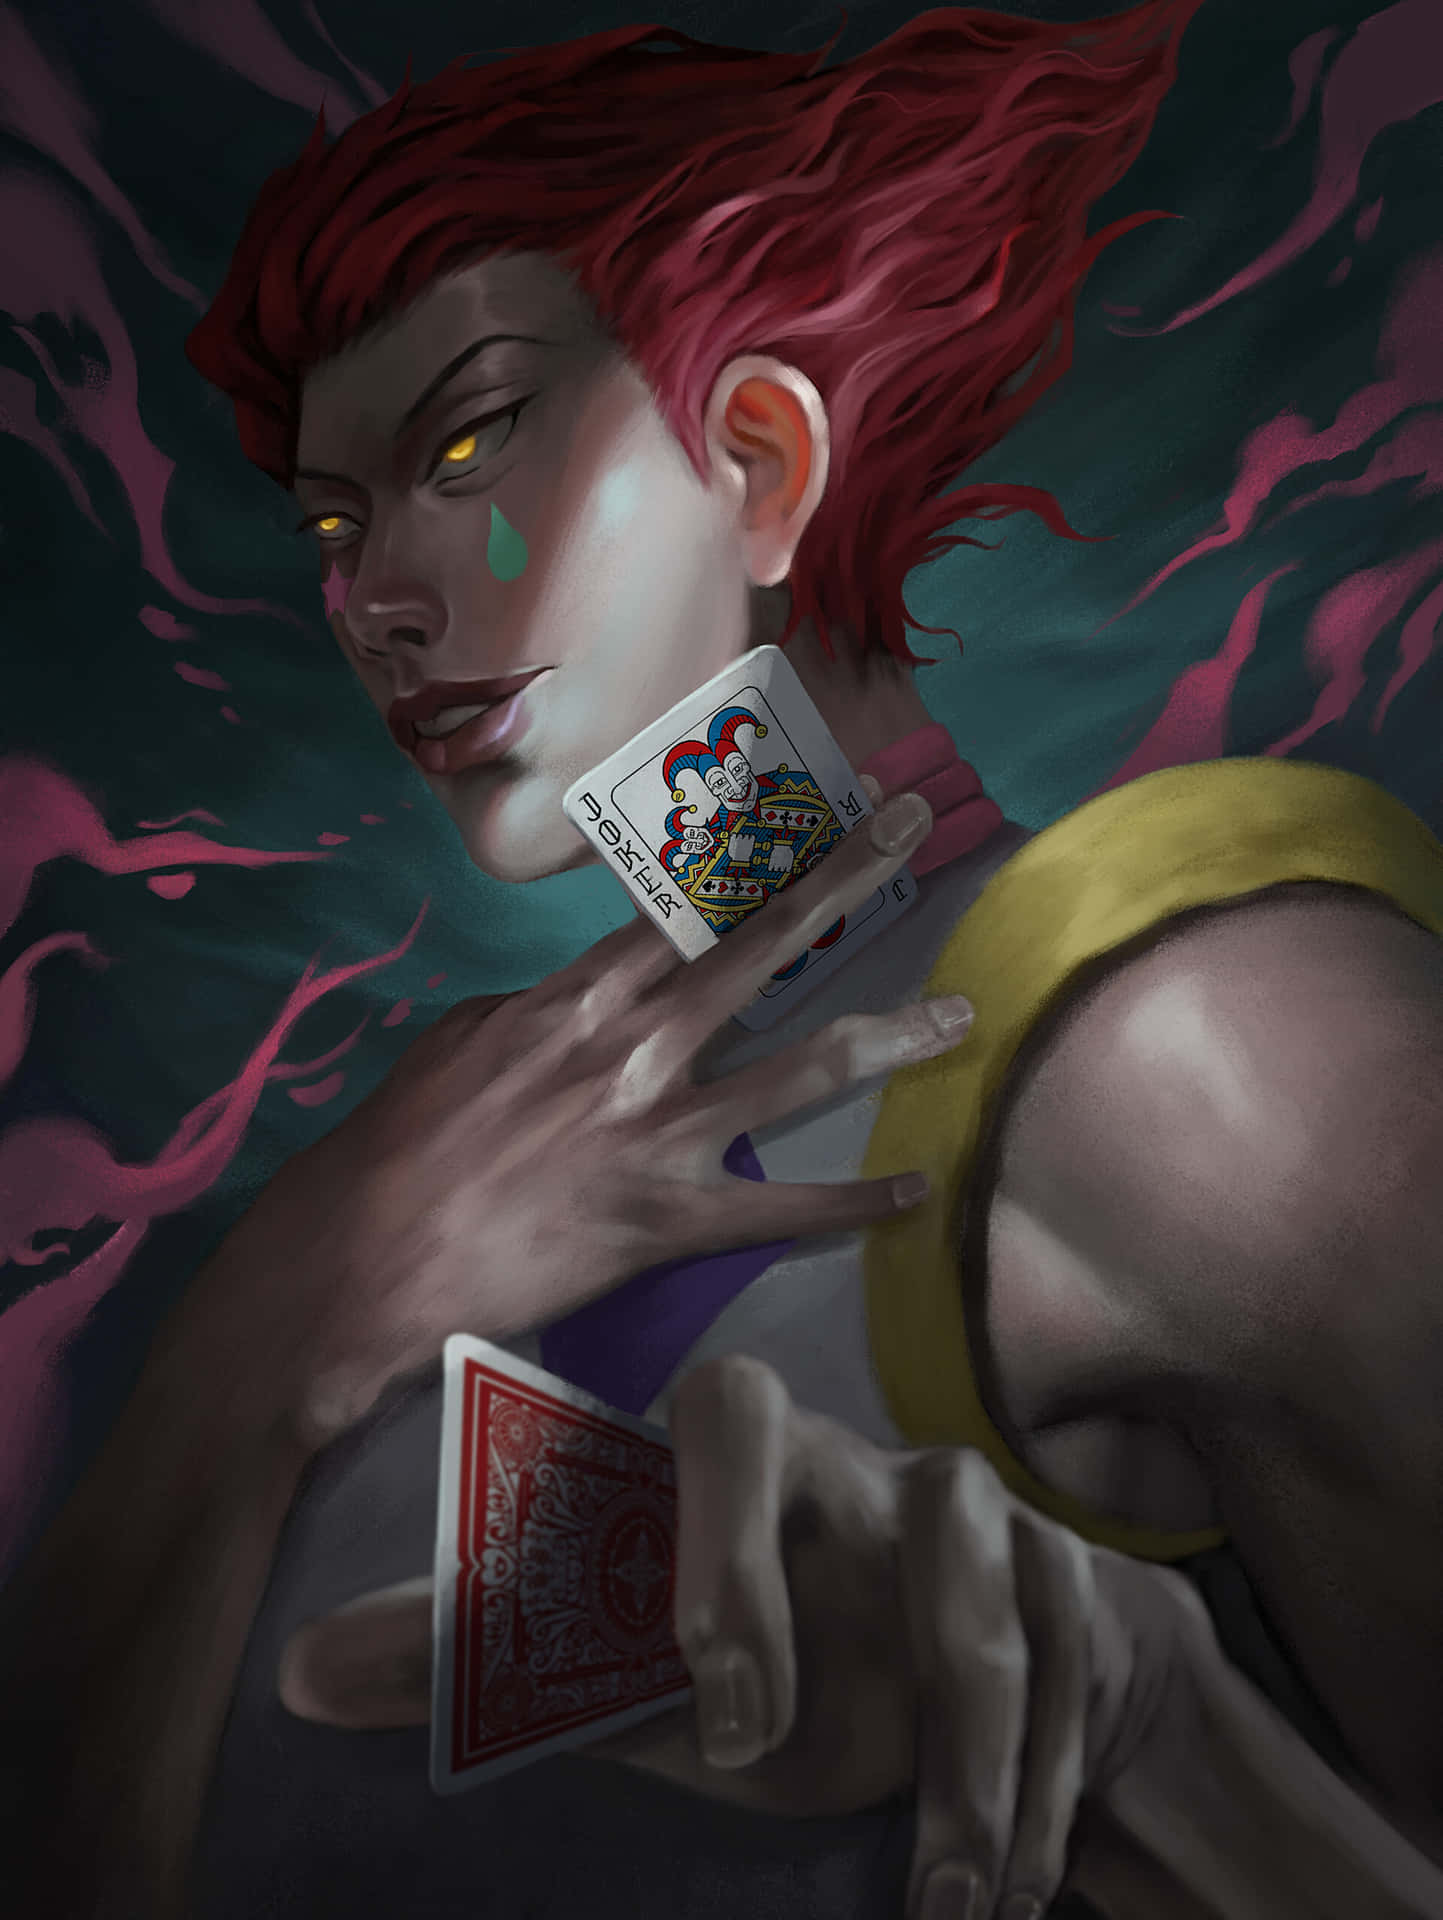 “Nothing is more evil than my soul.” -Hisoka